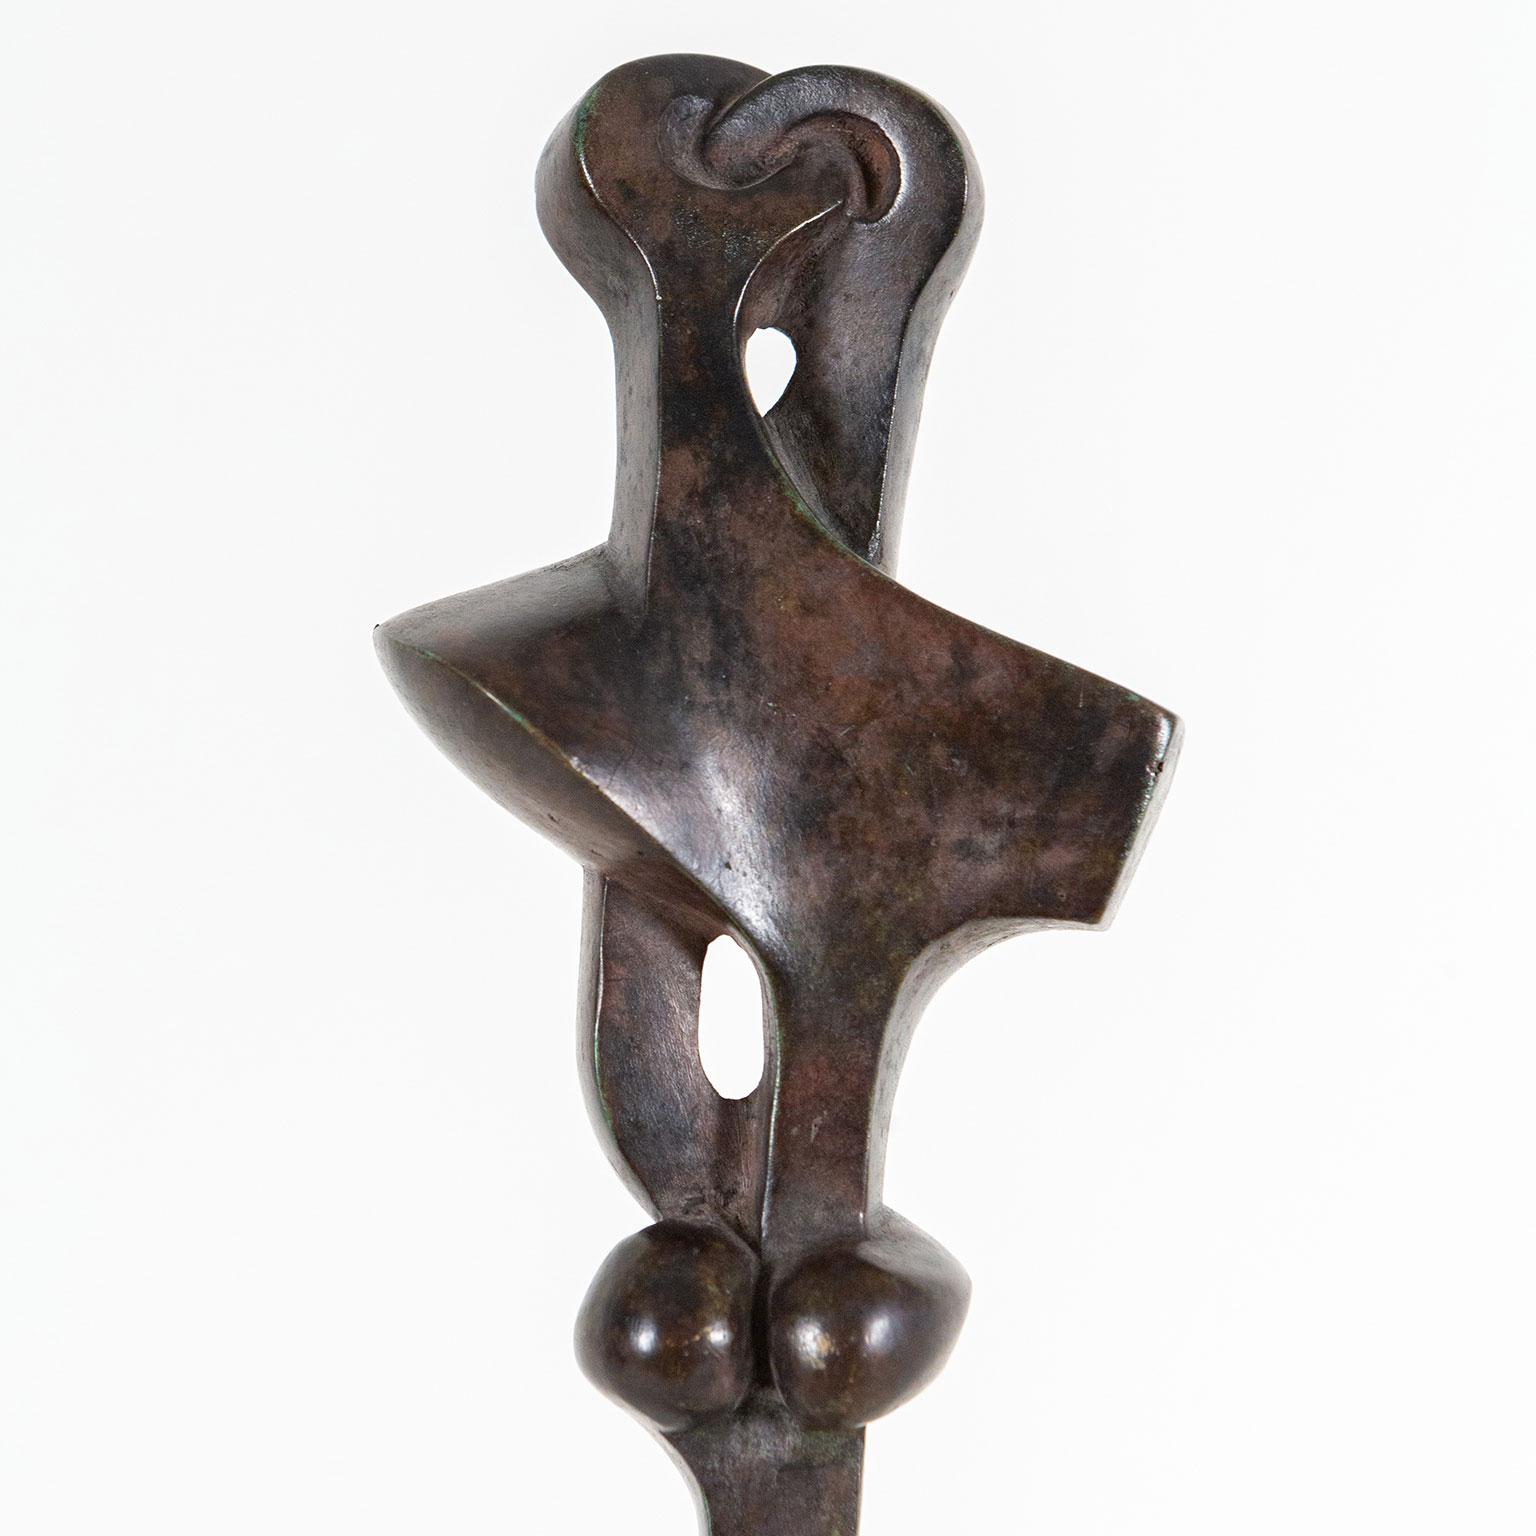 The Couple Study - Abstract Sculpture by Sorel Etrog